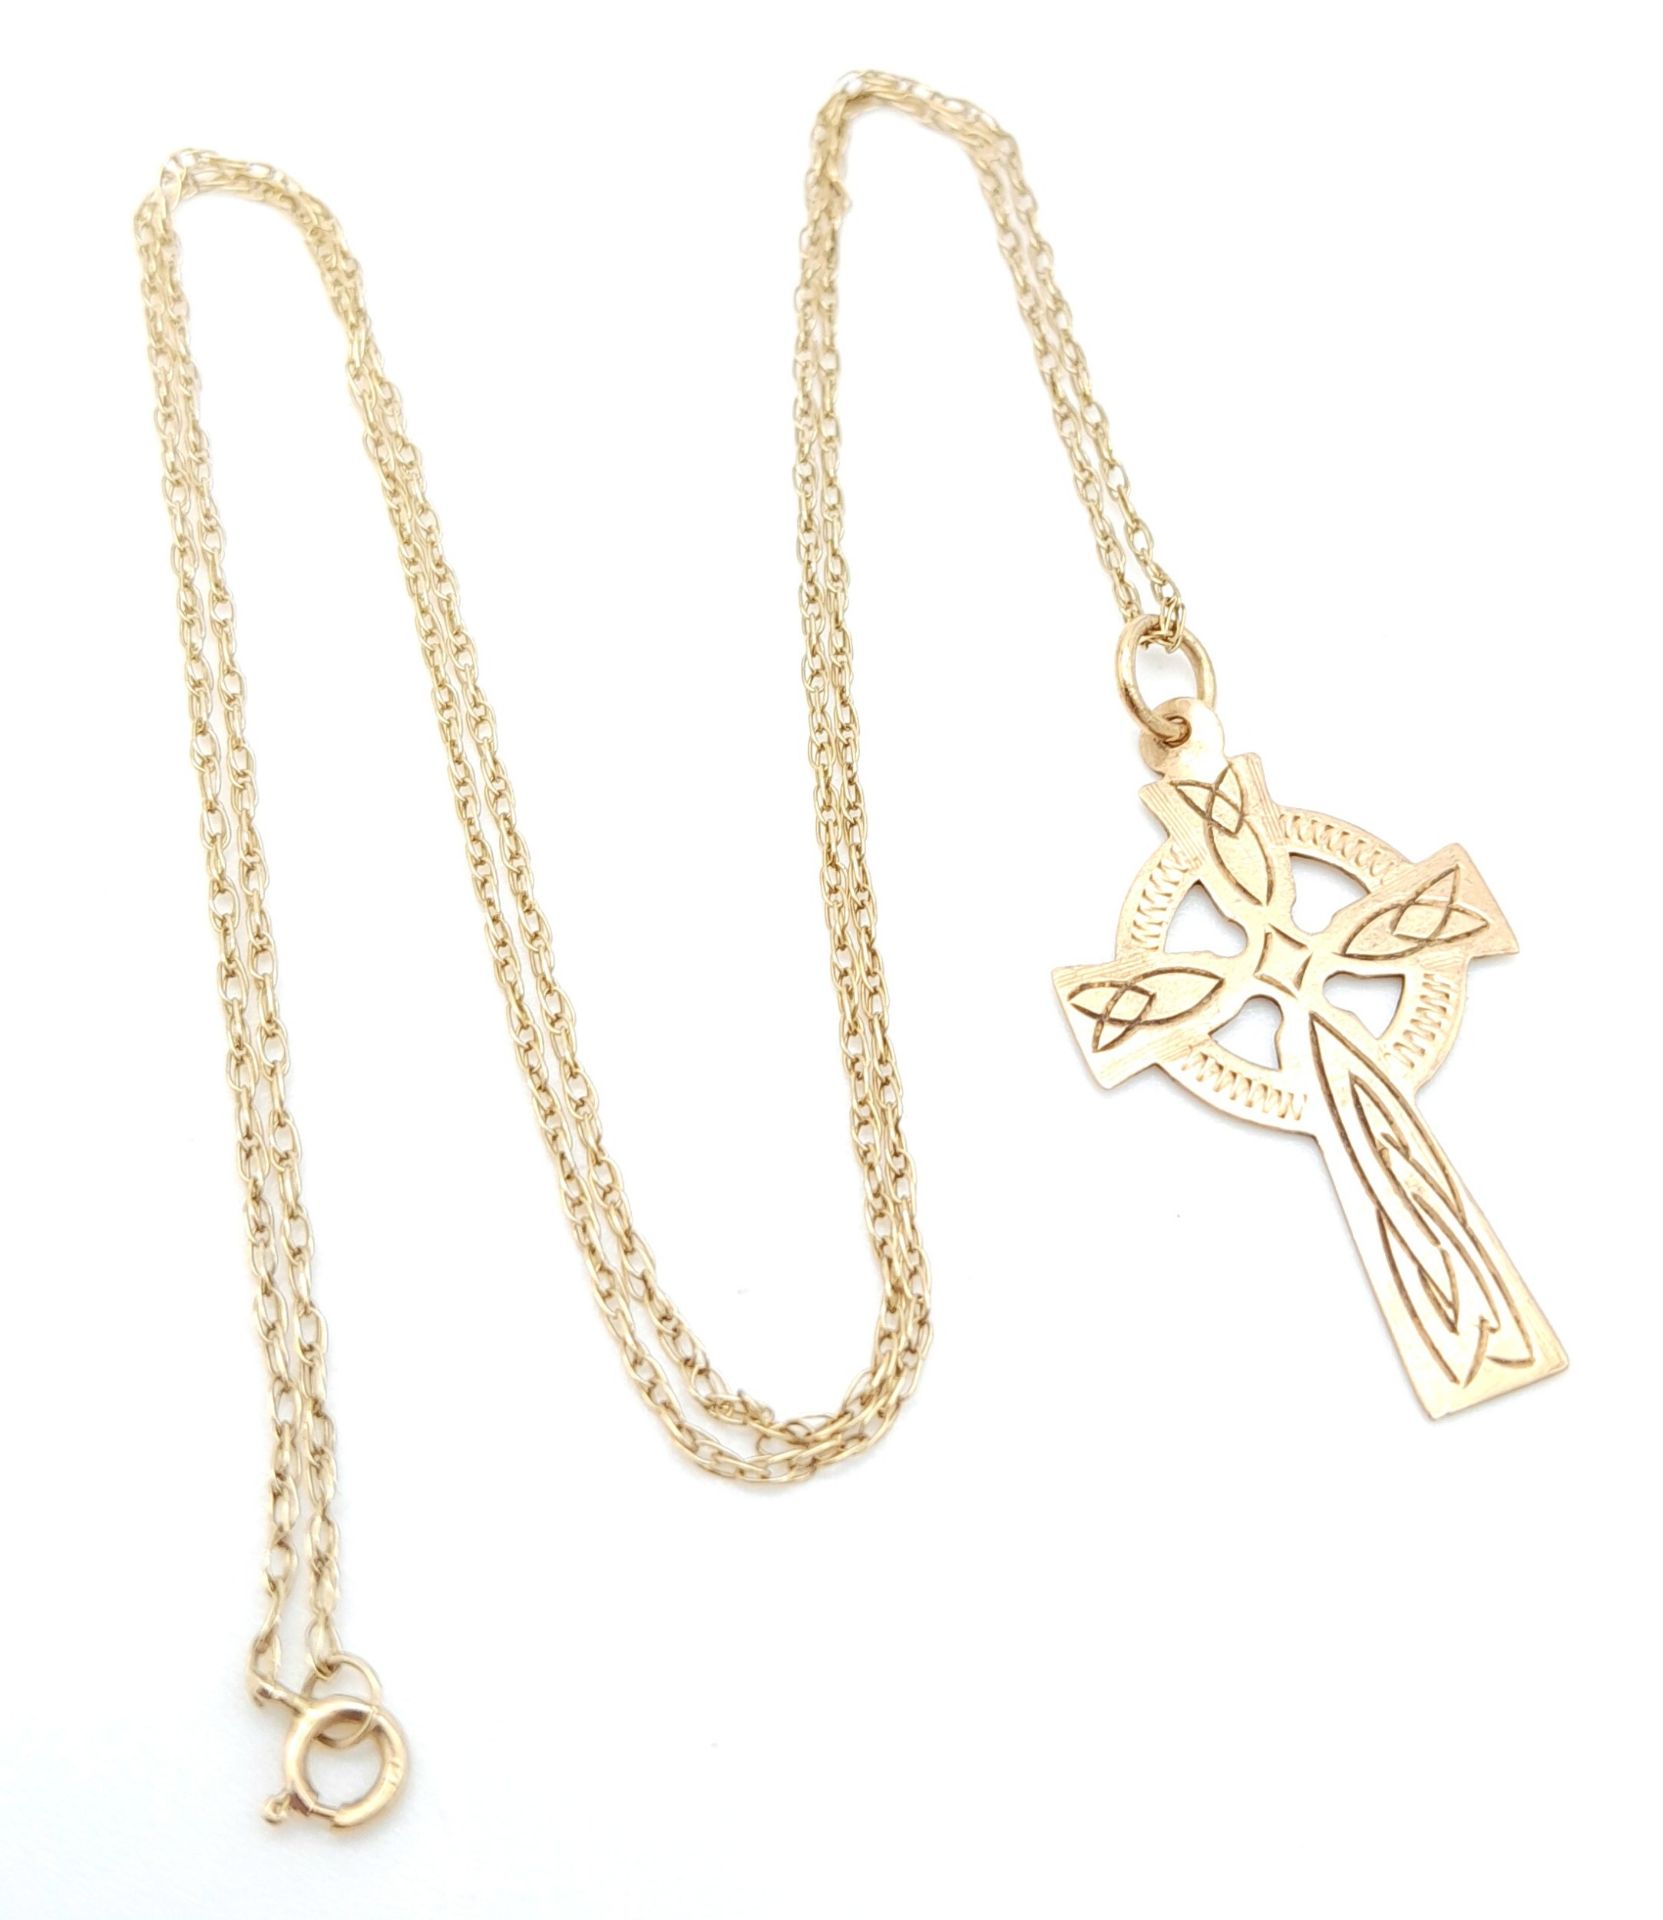 A 9 K yellow chain necklace with a Celtic cross pendant. Chain length: 46 cm, weight: 1.7 g. - Image 3 of 5